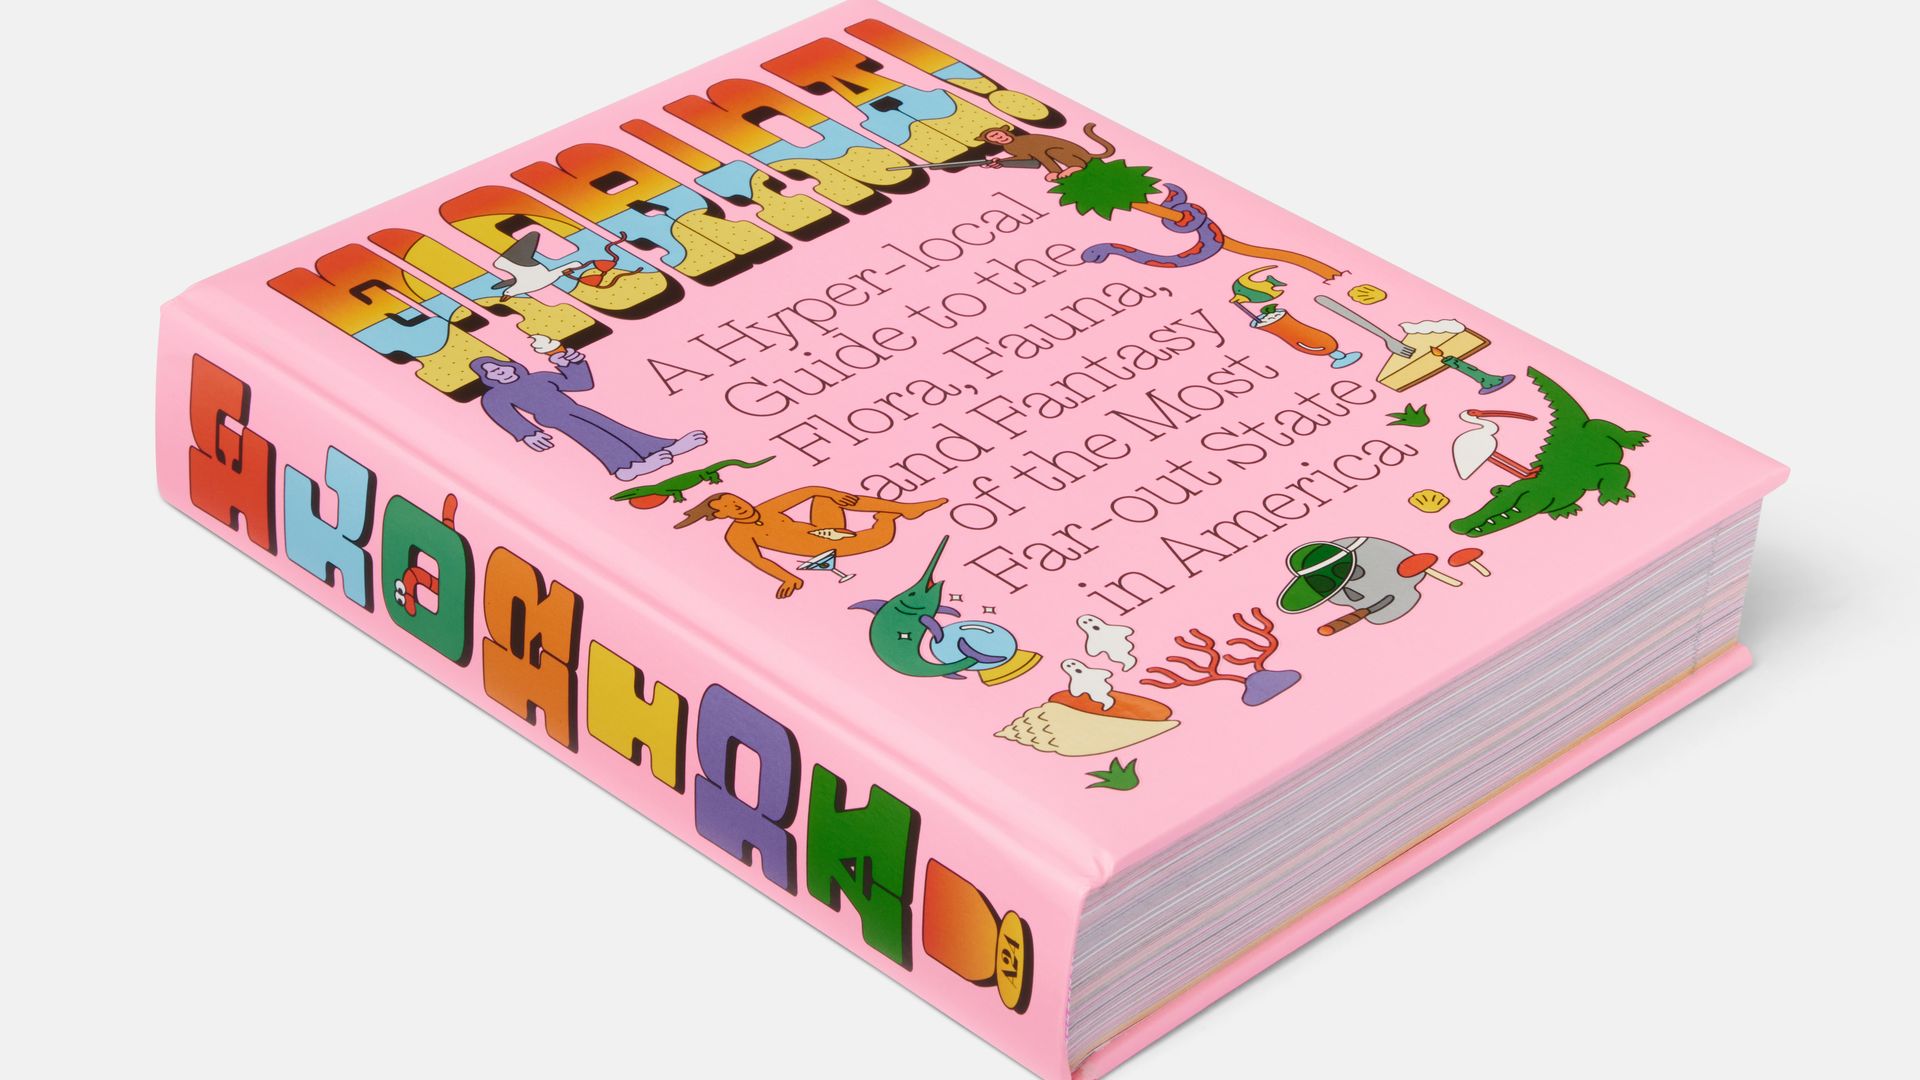 A photo of a colorful book